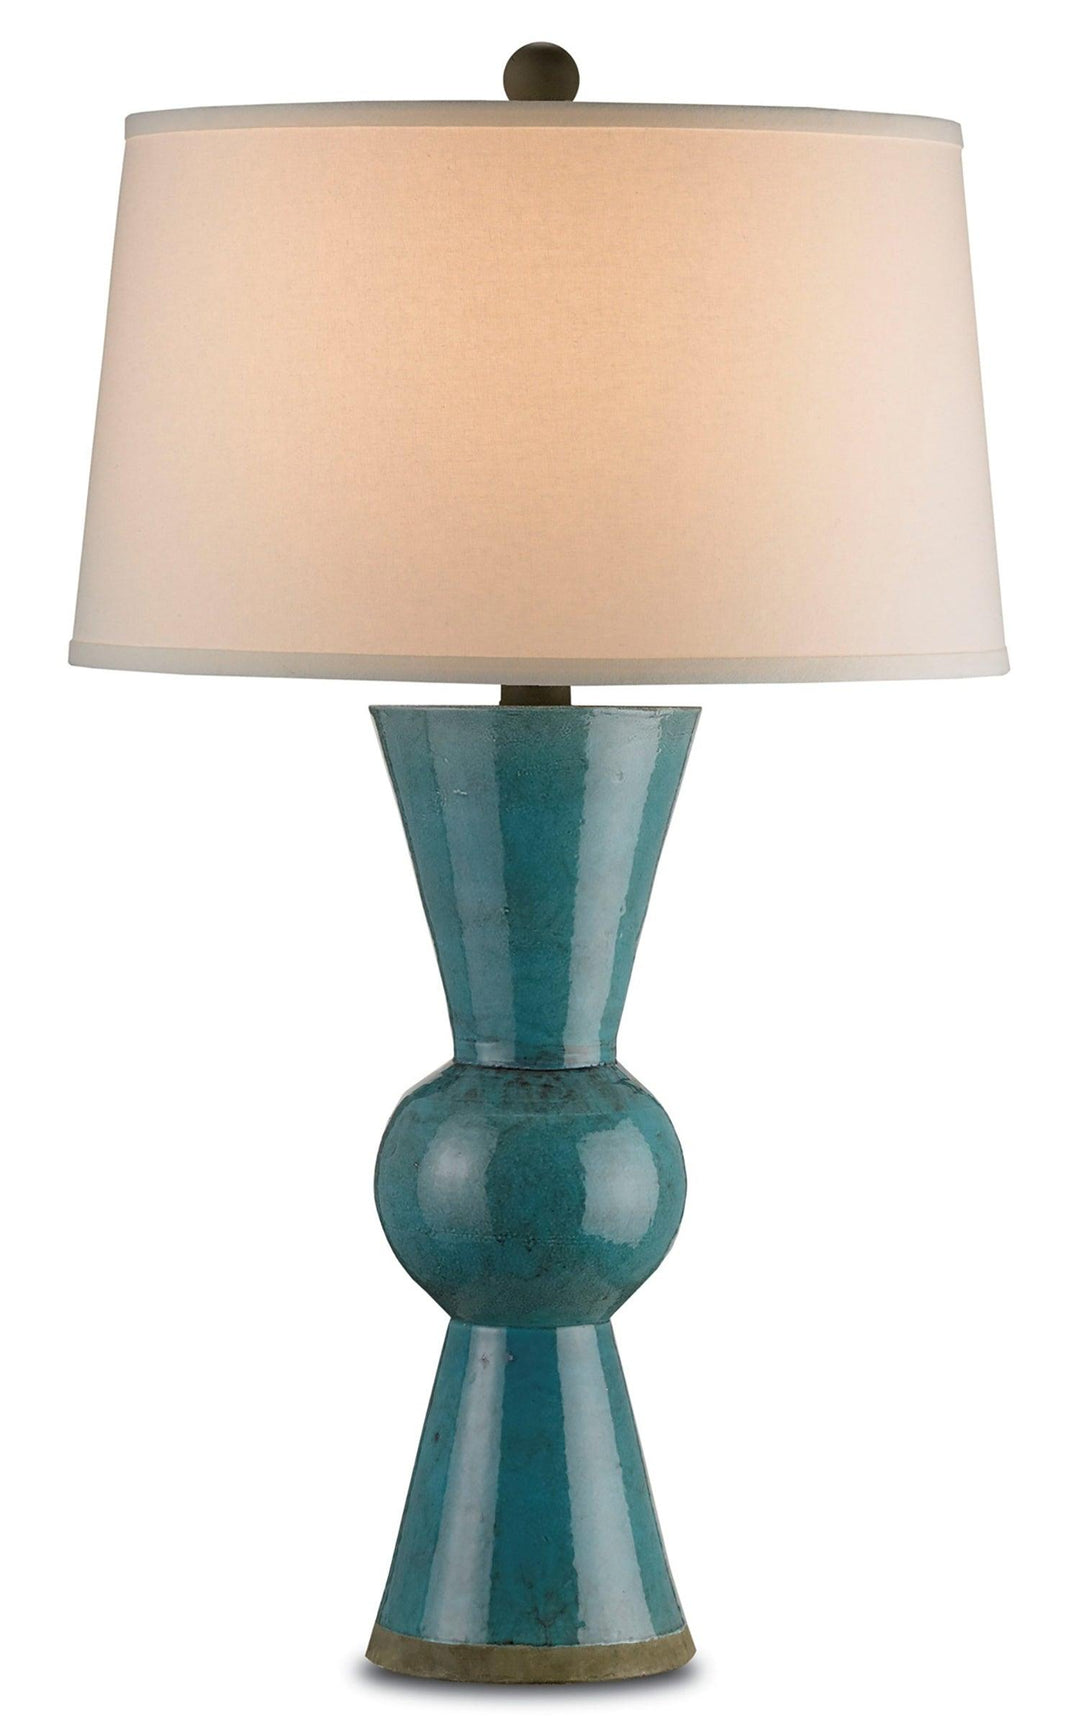 Upbeat Teal Table Lamp - Casey & Company